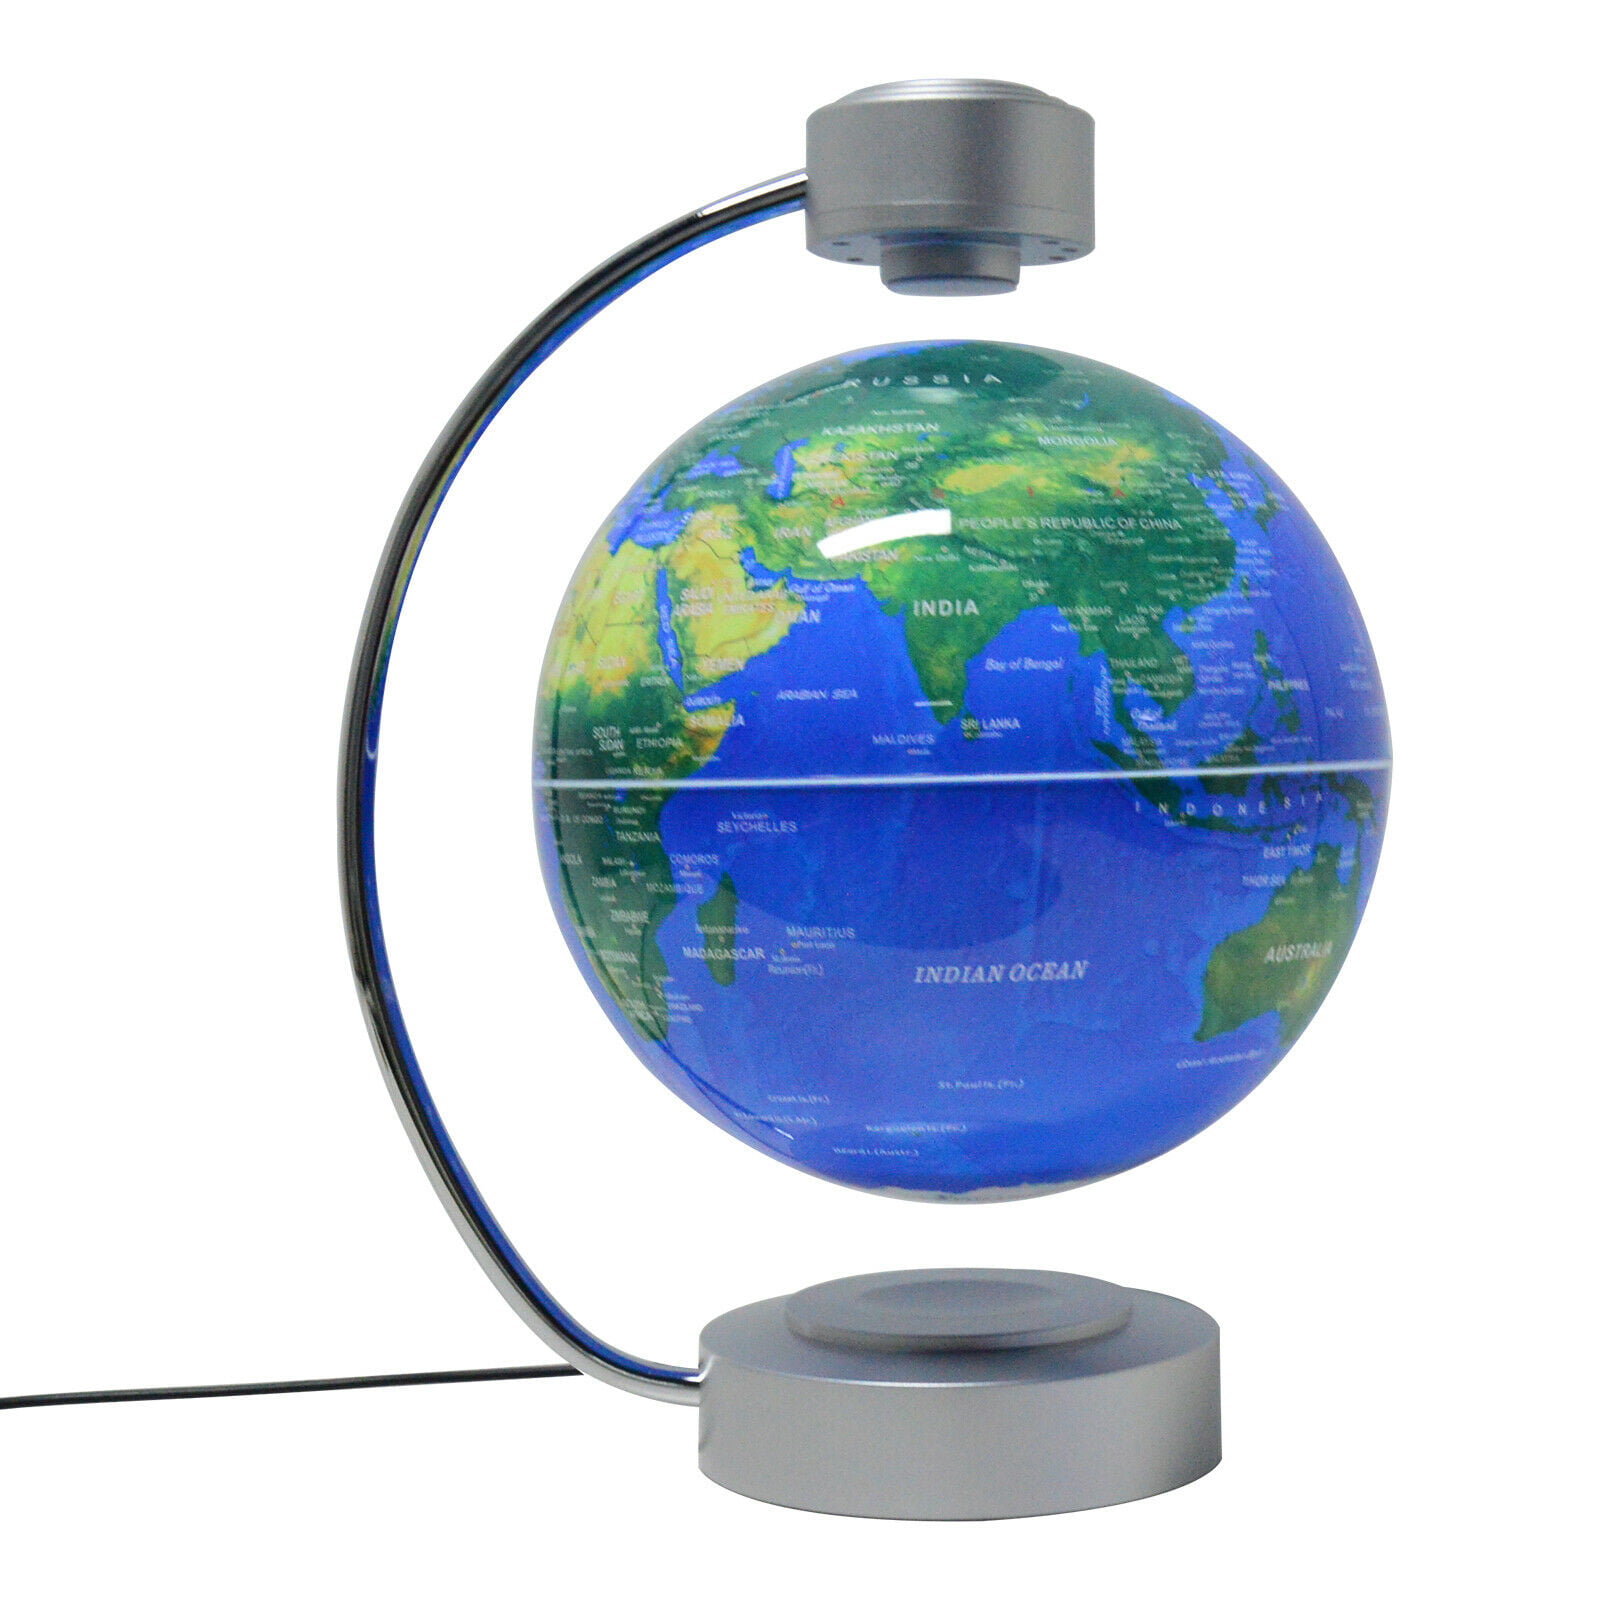 Educational Gifts for Kids Office Desk Display Magnetic Levitating Rotating Planet Earth Ball Blue Floating Globe Home Office Desk Decoration